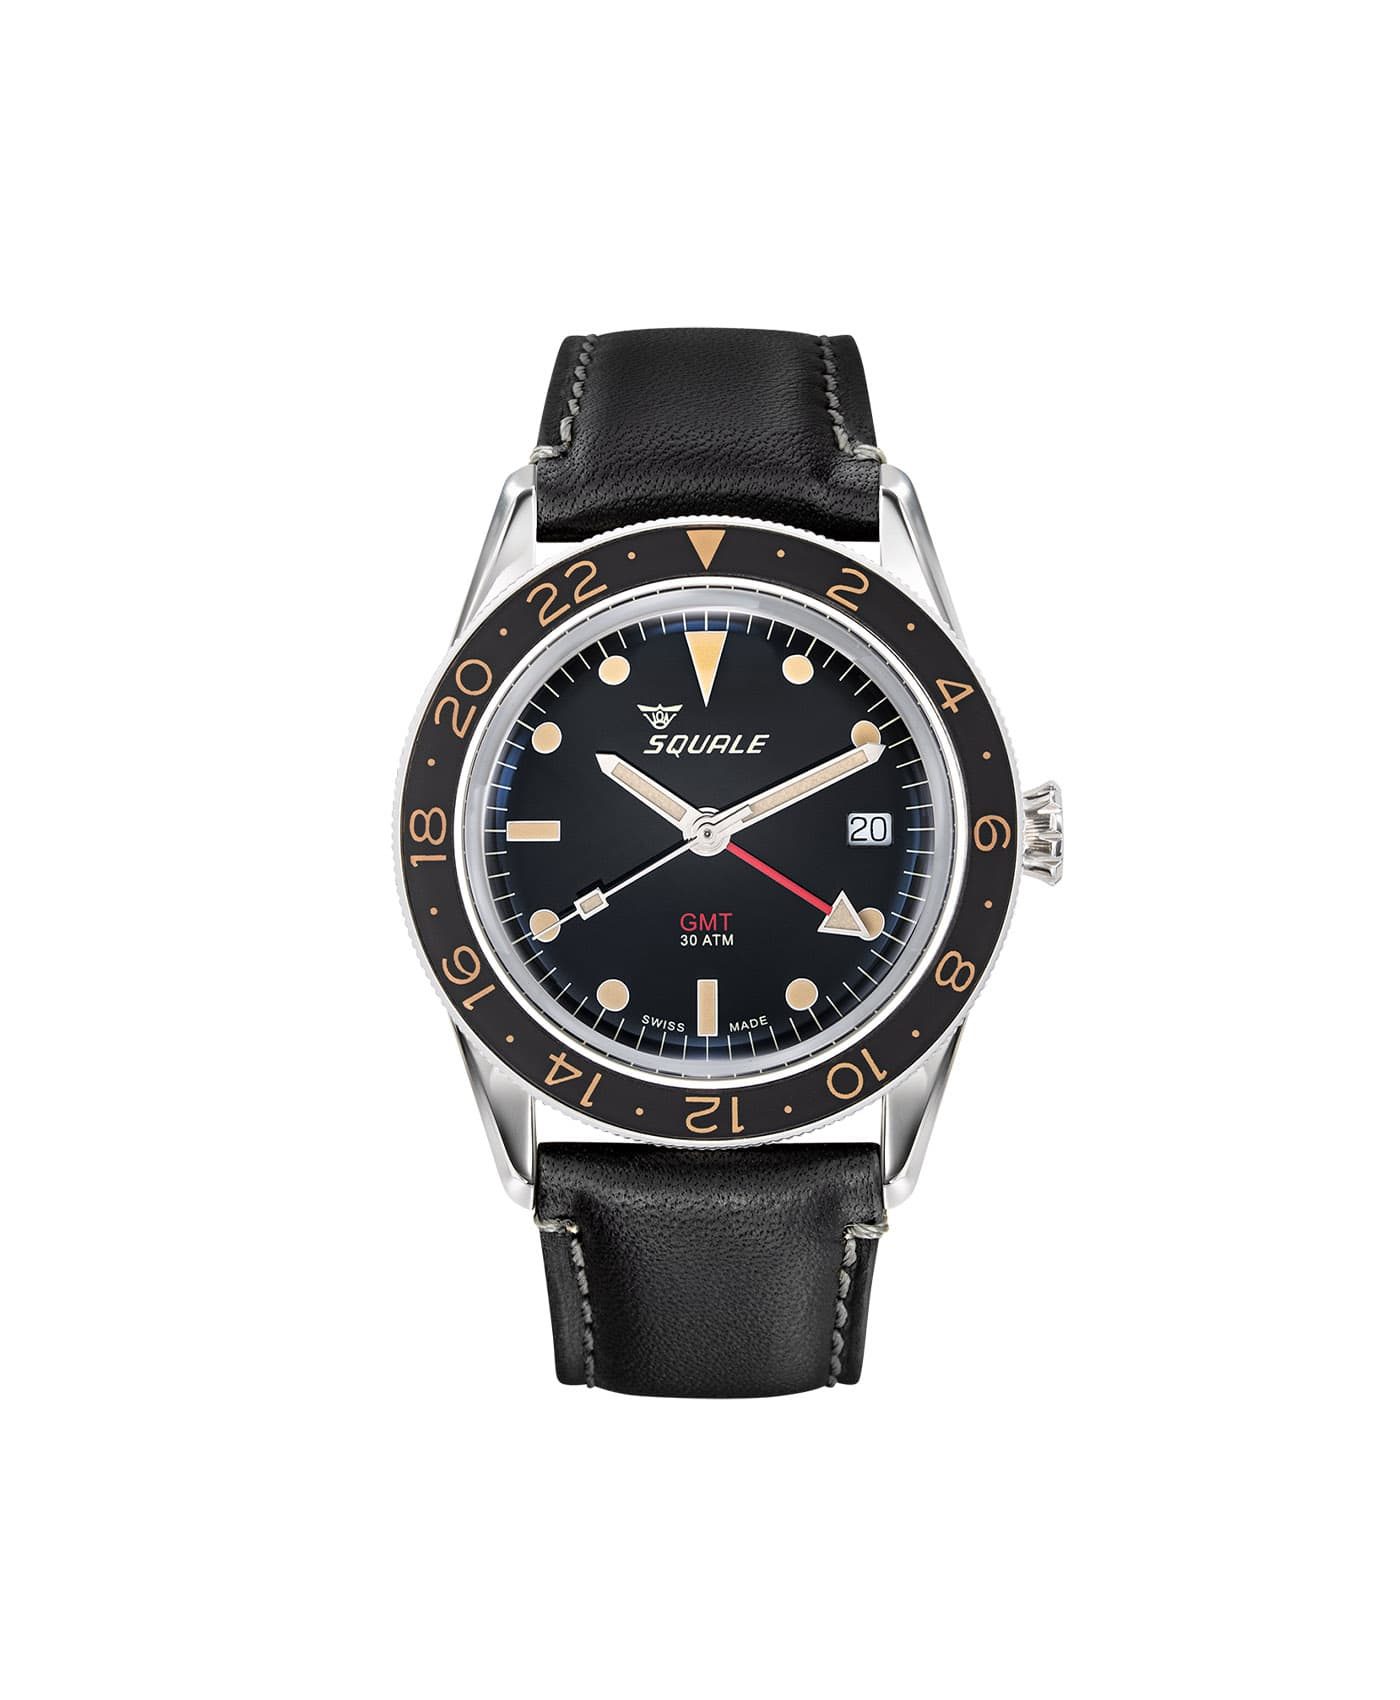 Squale SUB-39 GMT black dial front